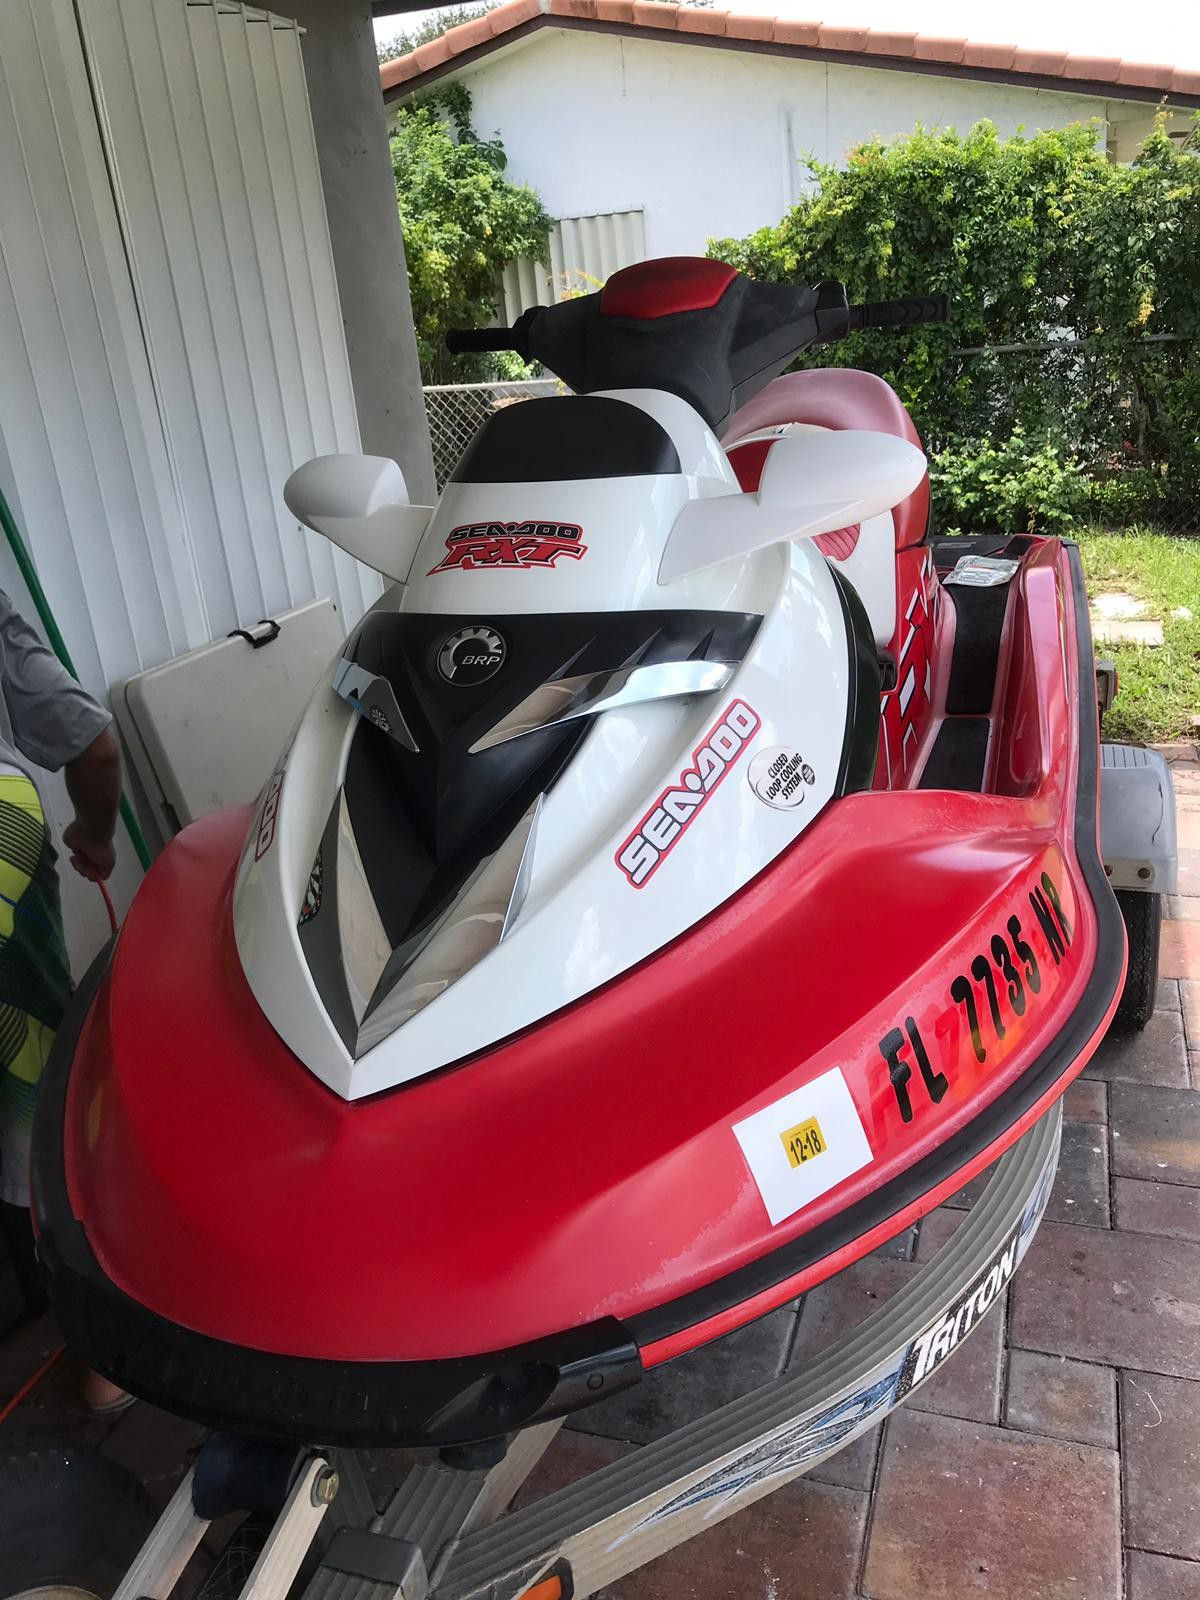 2008 Sea doo rxt 215 supercharged